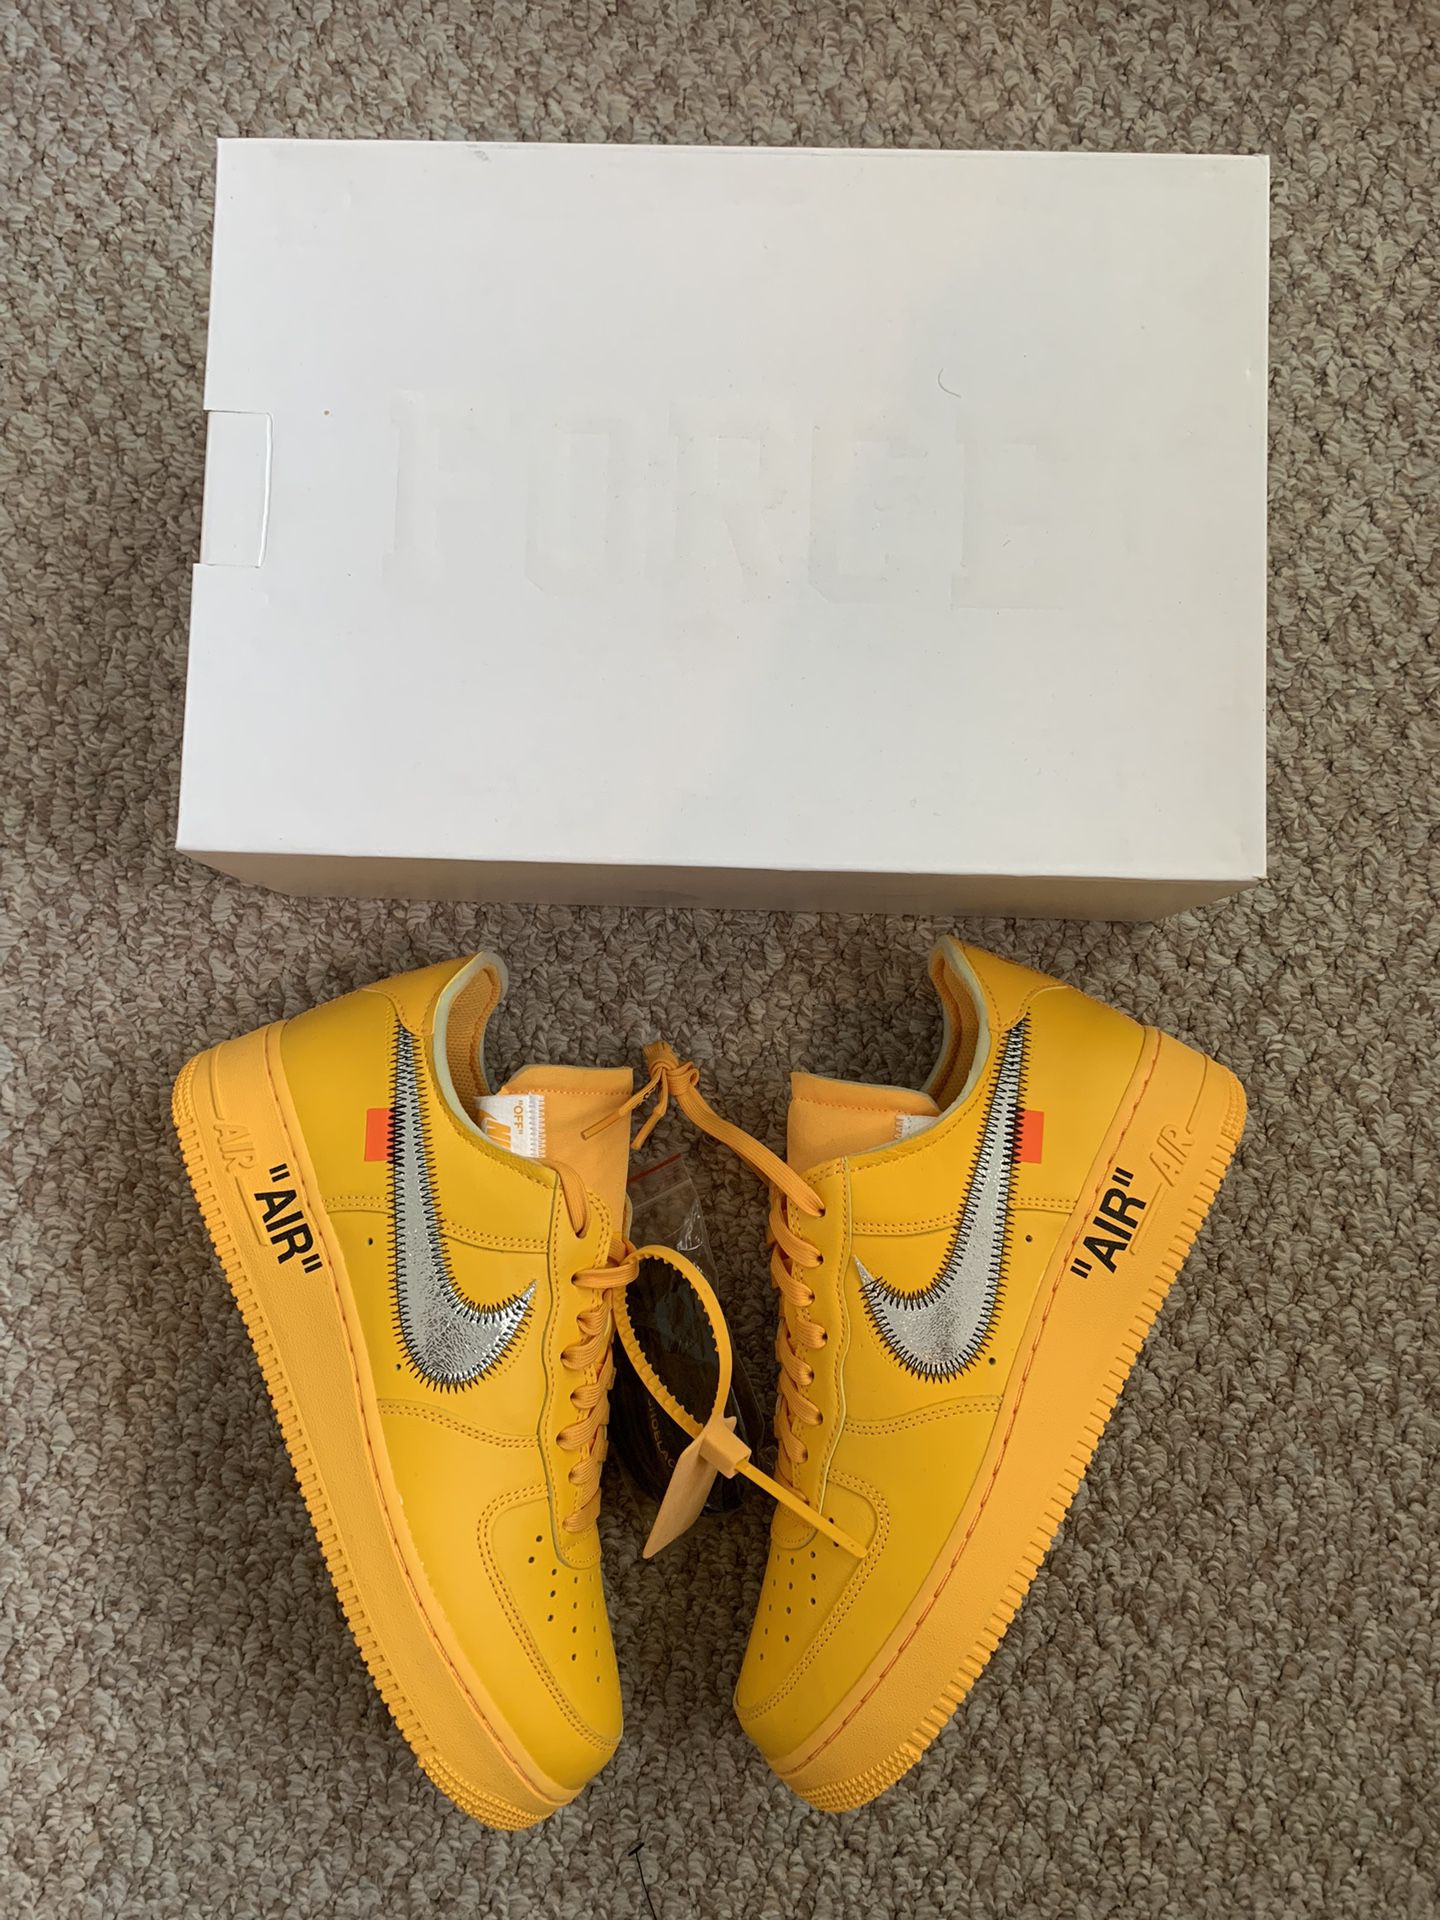 Nike Off White Air Force 1 “ICA Lemonade” Size 9 (New) ❤️‍🔥